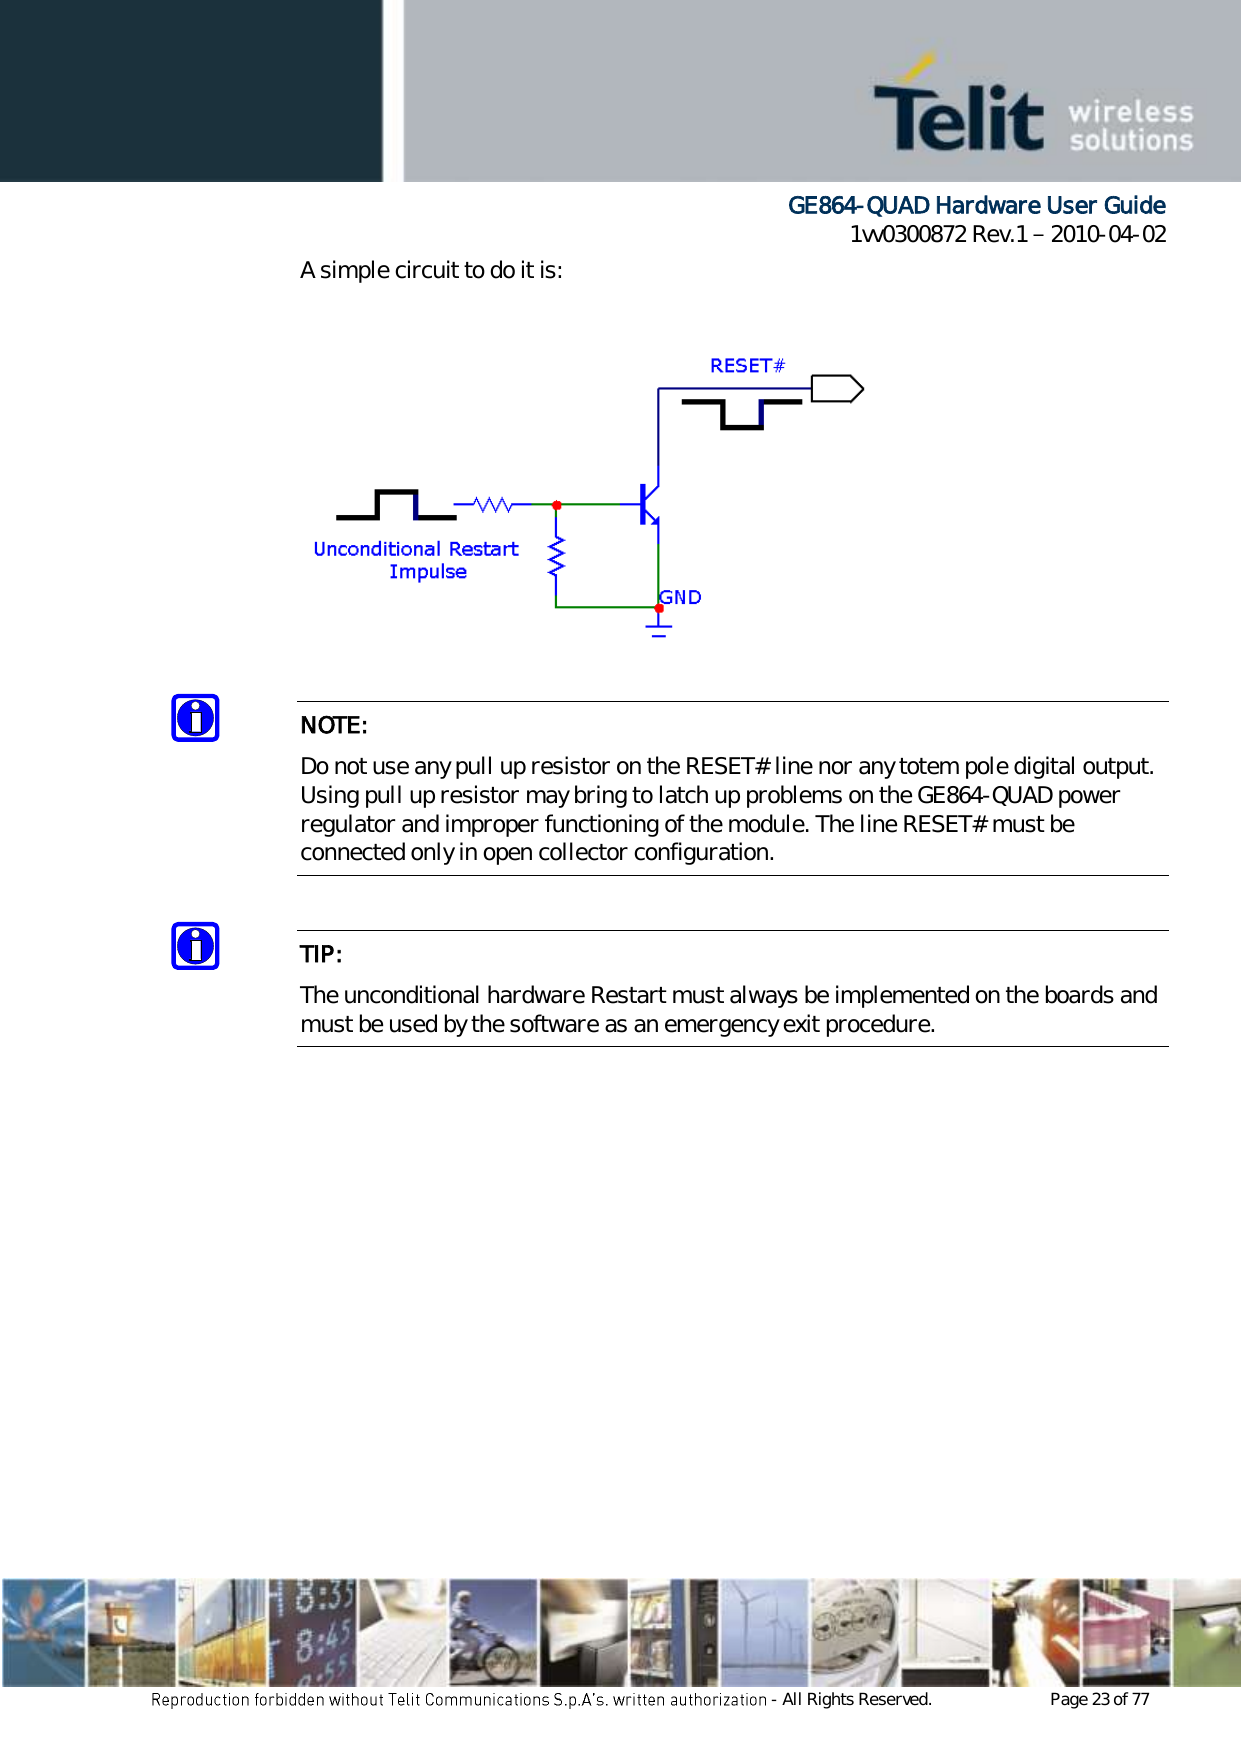      GE864-QUAD Hardware User Guide 1vv0300872 Rev.1   2010-04-02 - All Rights Reserved.    Page 23 of 77  A simple circuit to do it is:    NOTE: Do not use any pull up resistor on the RESET# line nor any totem pole digital output. Using pull up resistor may bring to latch up problems on the GE864-QUAD power regulator and improper functioning of the module. The line RESET# must be connected only in open collector configuration.  TIP: The unconditional hardware Restart must always be implemented on the boards and must be used by the software as an emergency exit procedure.            